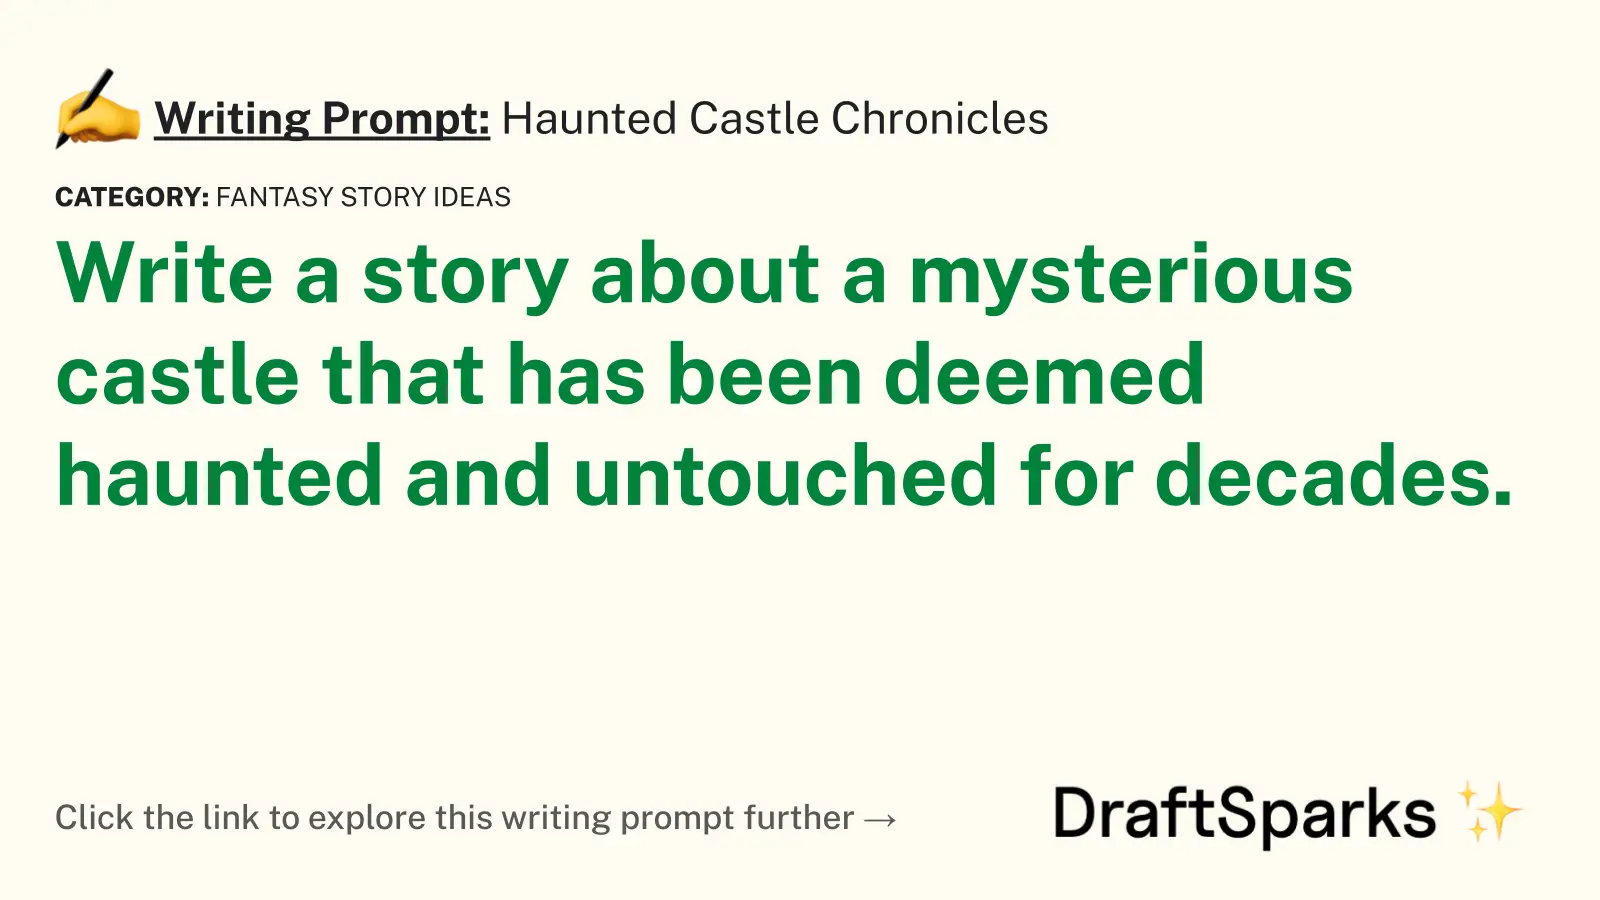 Haunted Castle Chronicles